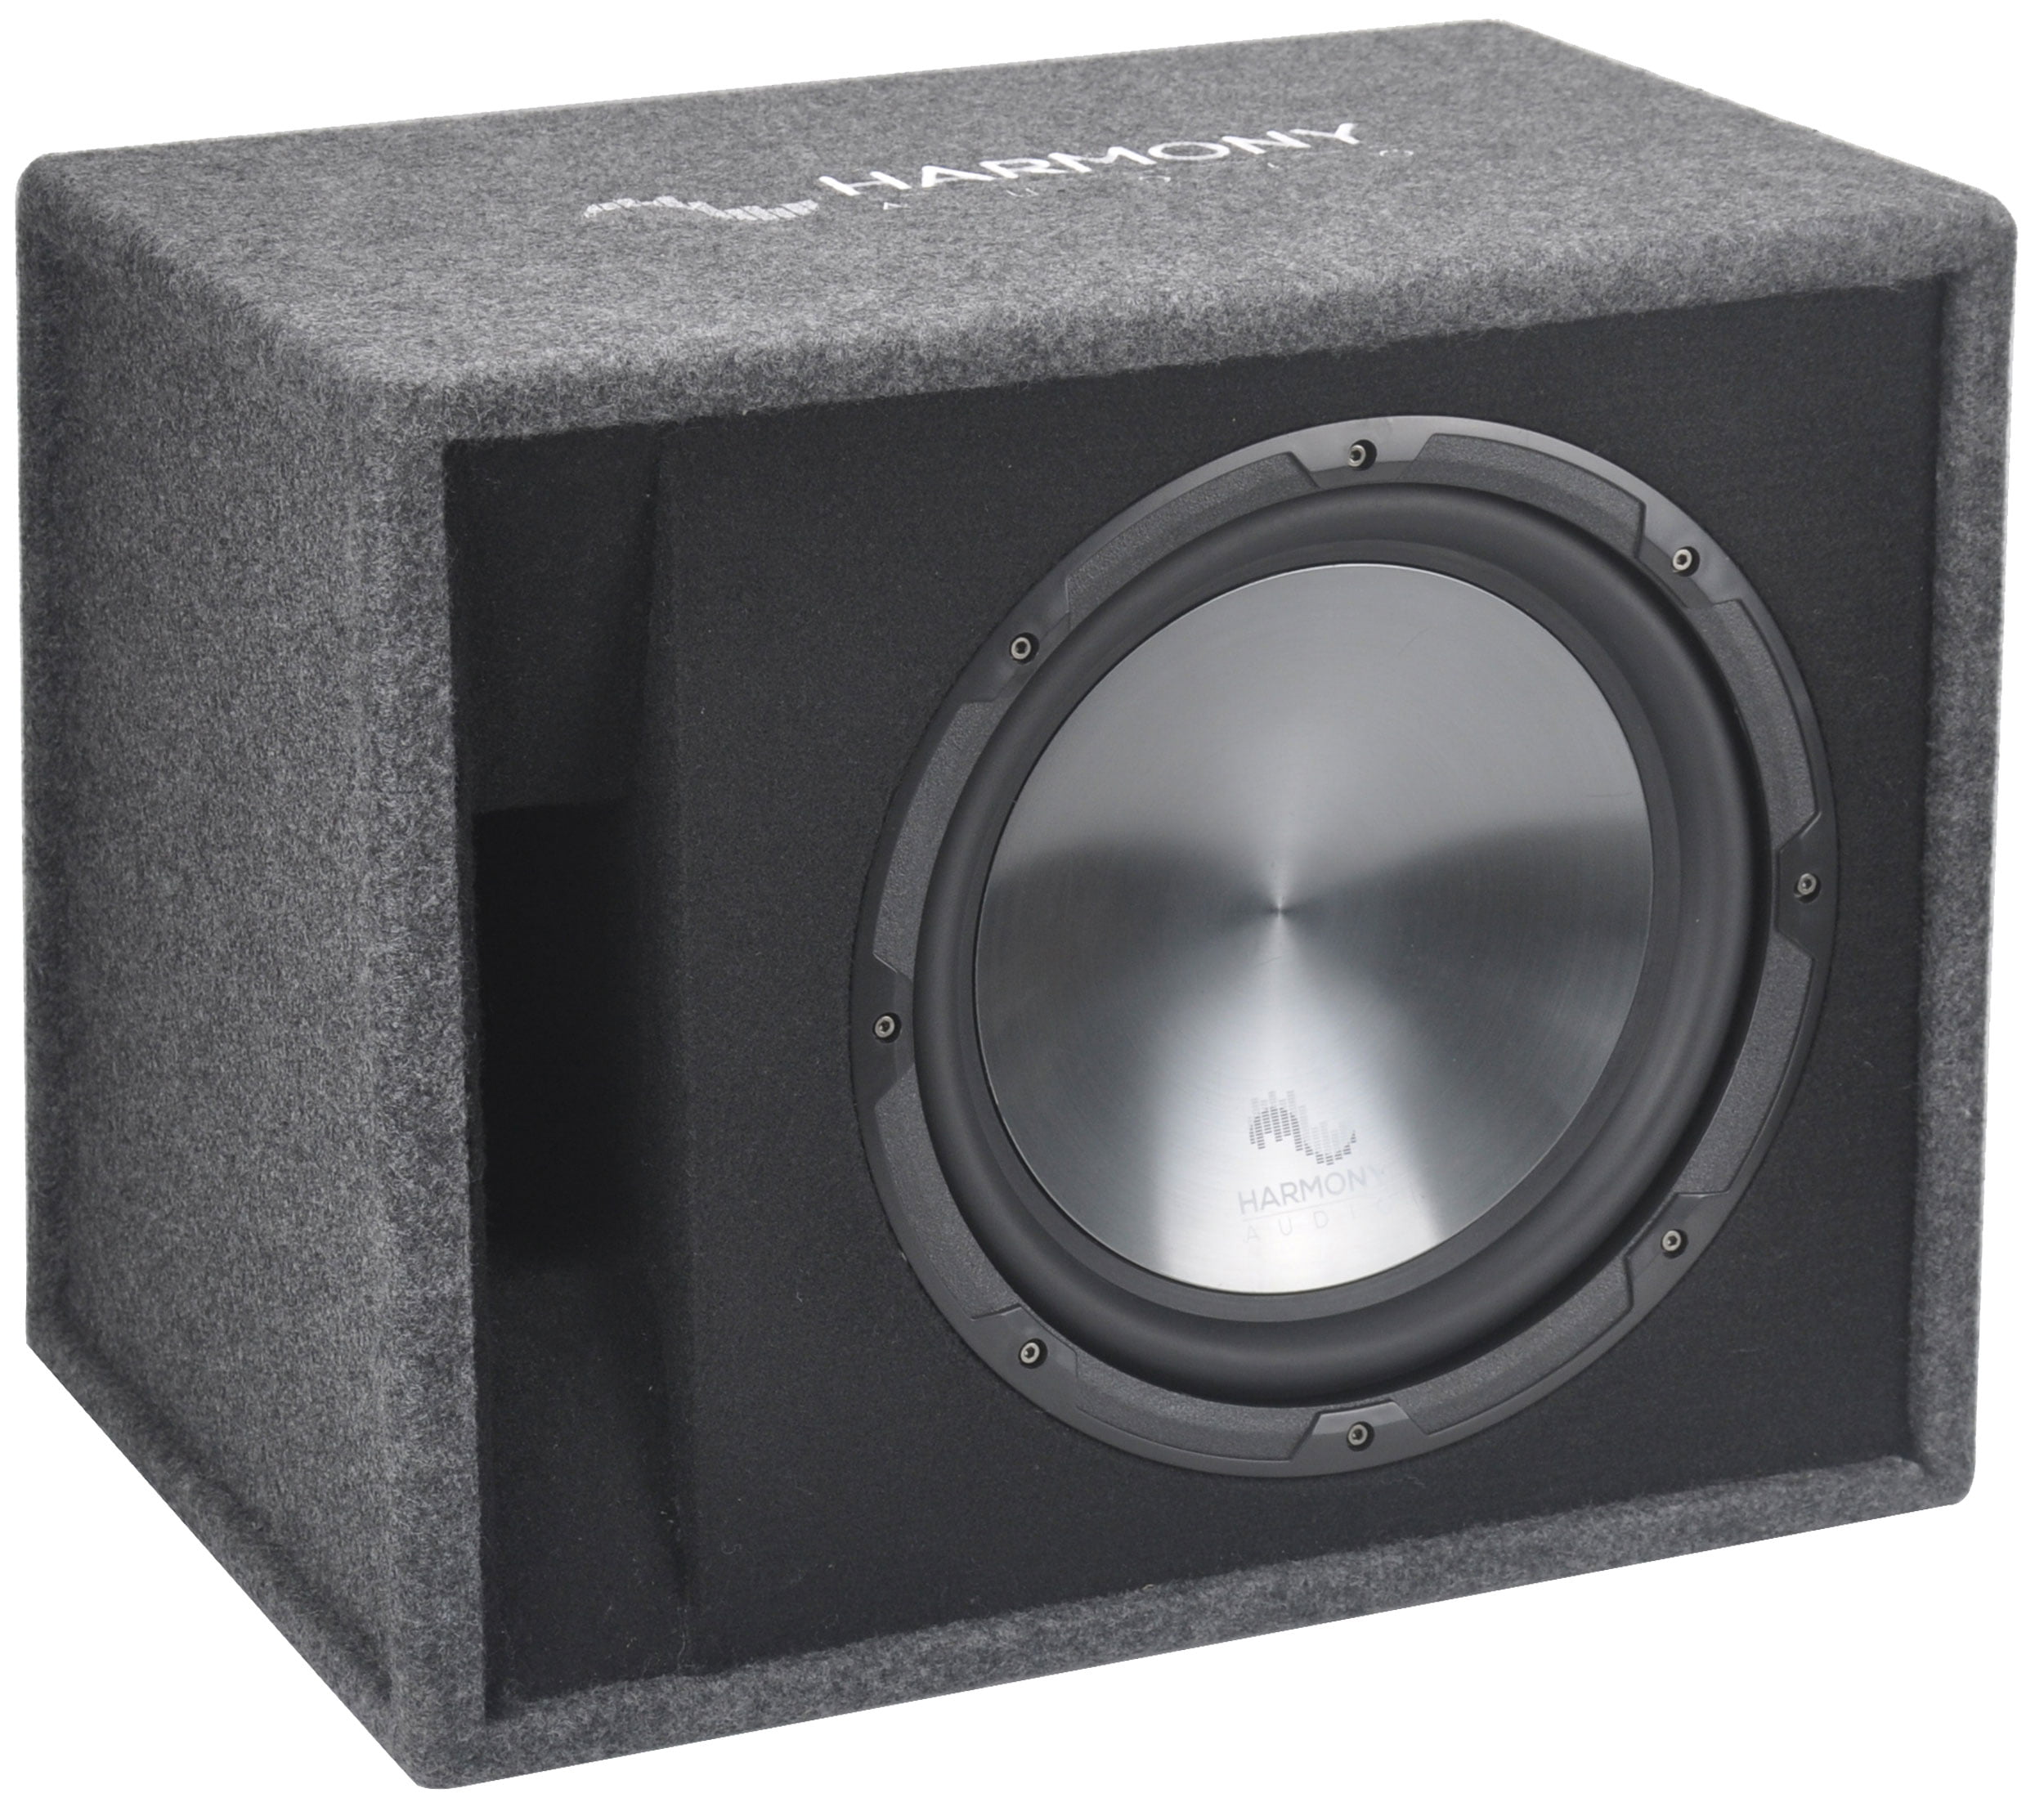 Monolith 12 Subwoofer: Is It The Ultimate Bass Solution